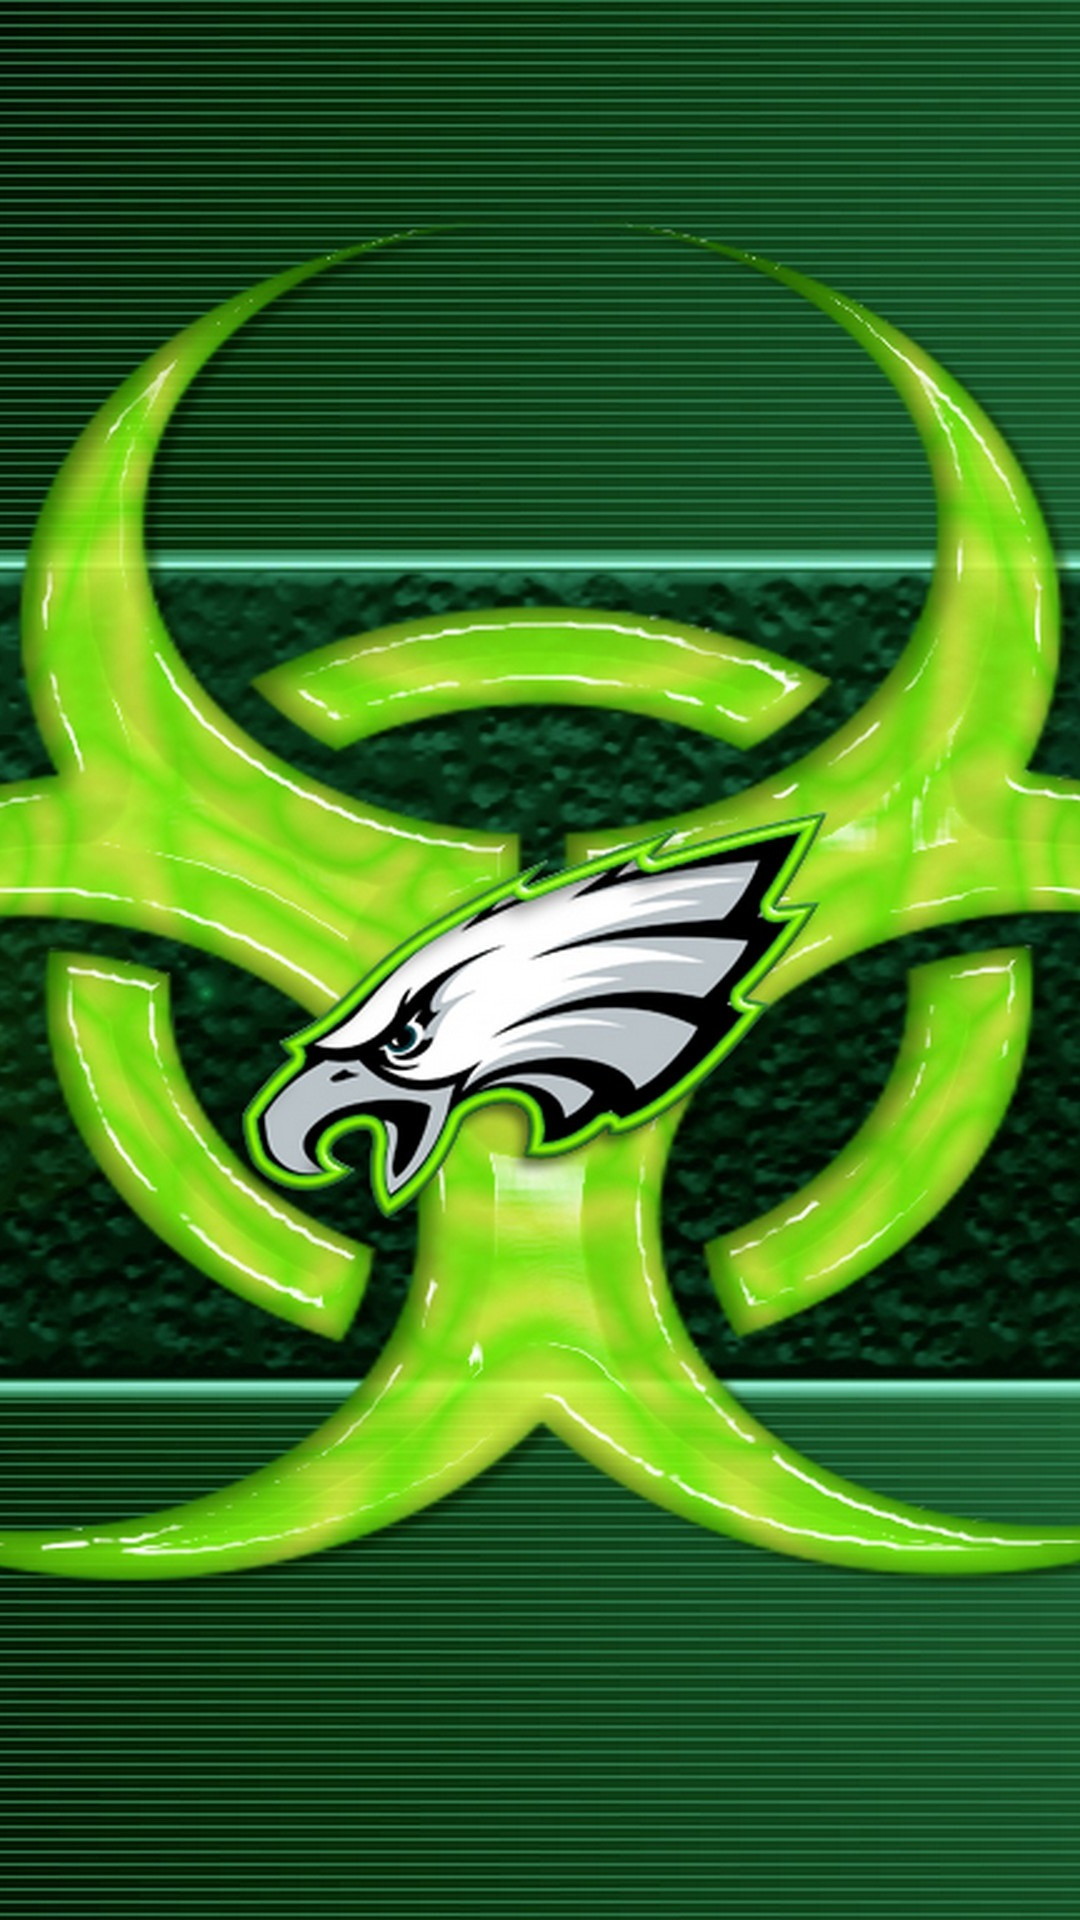 Screensaver iPhone Philadelphia Eagles With high-resolution 1080X1920 pixel. Donwload and set as wallpaper for your iPhone X, iPhone XS home screen backgrounds, XS Max, XR, iPhone8 lock screen wallpaper, iPhone 7, 6, SE, and other mobile devices